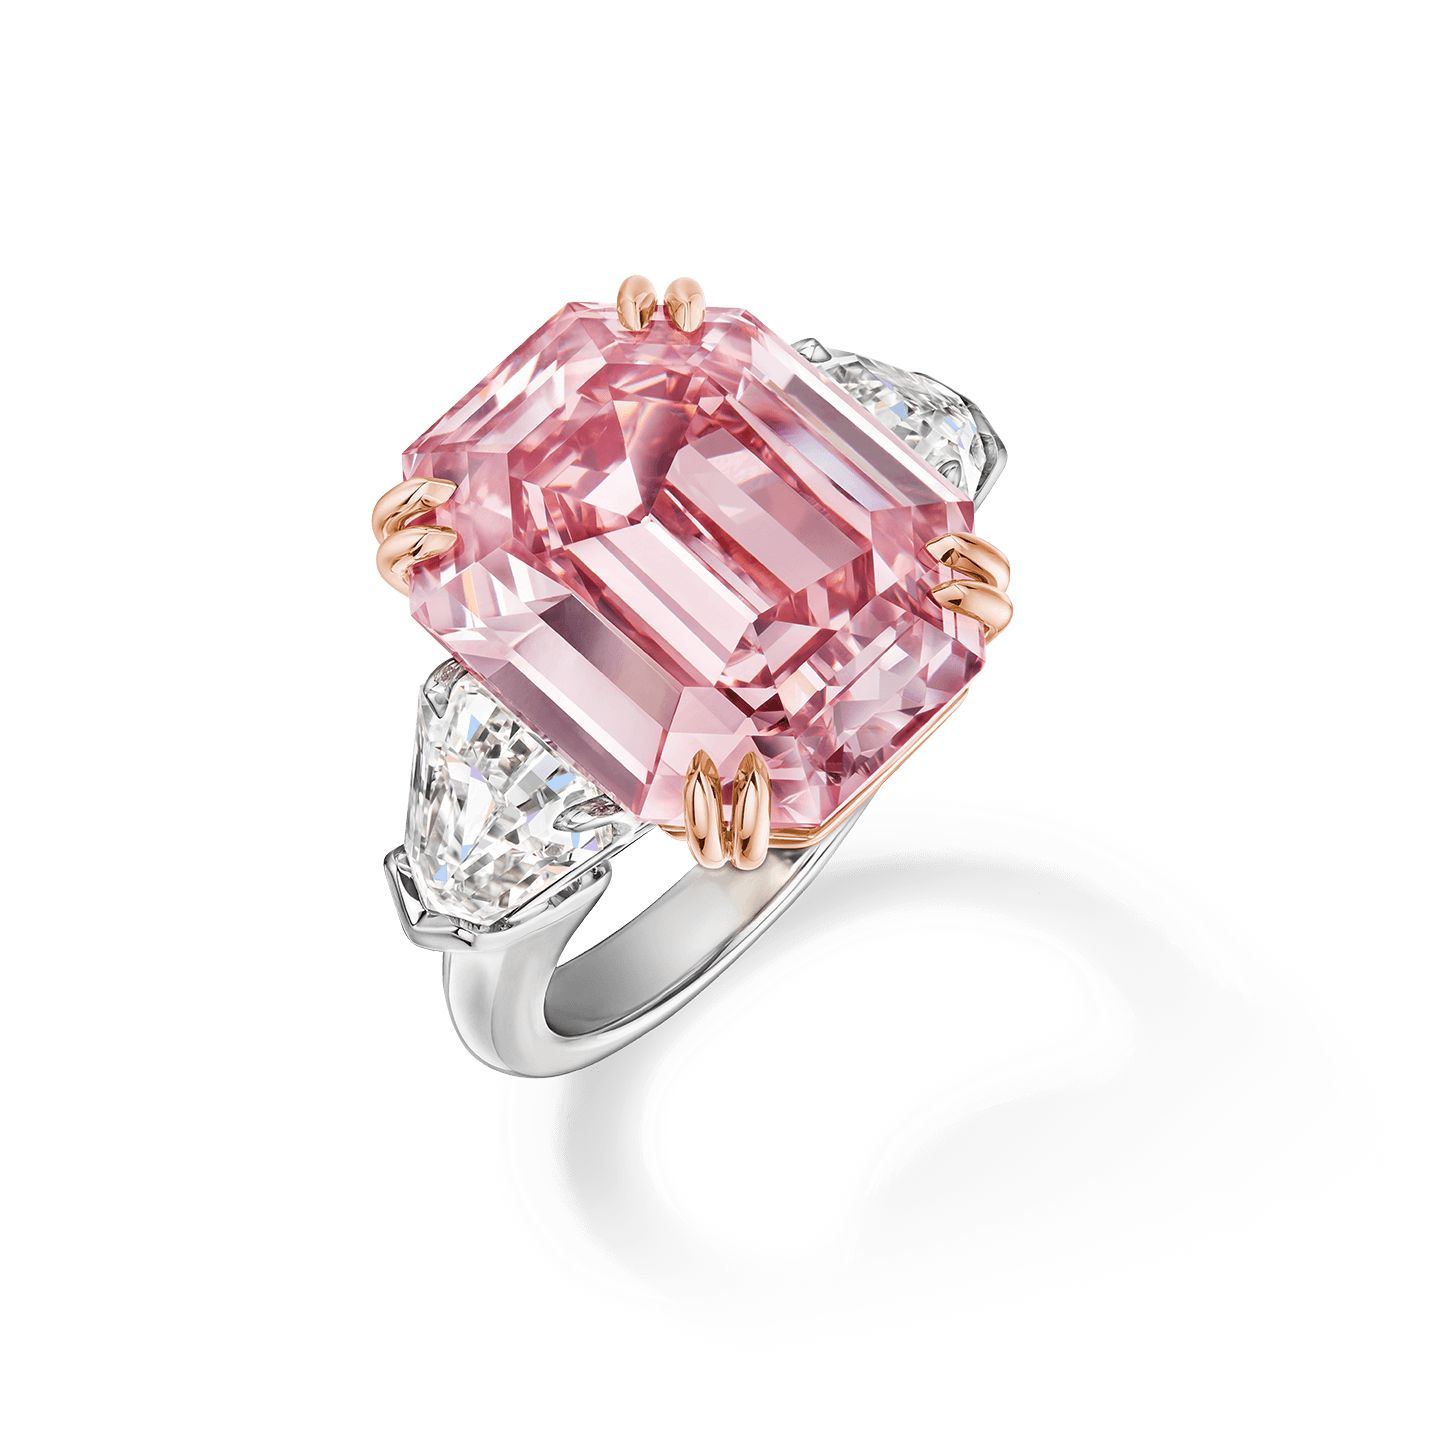 The Best Pink Engagement Rings - Padparadscha Sapphire, Pink Diamond, and  Pink Sapphire Engagement Rings